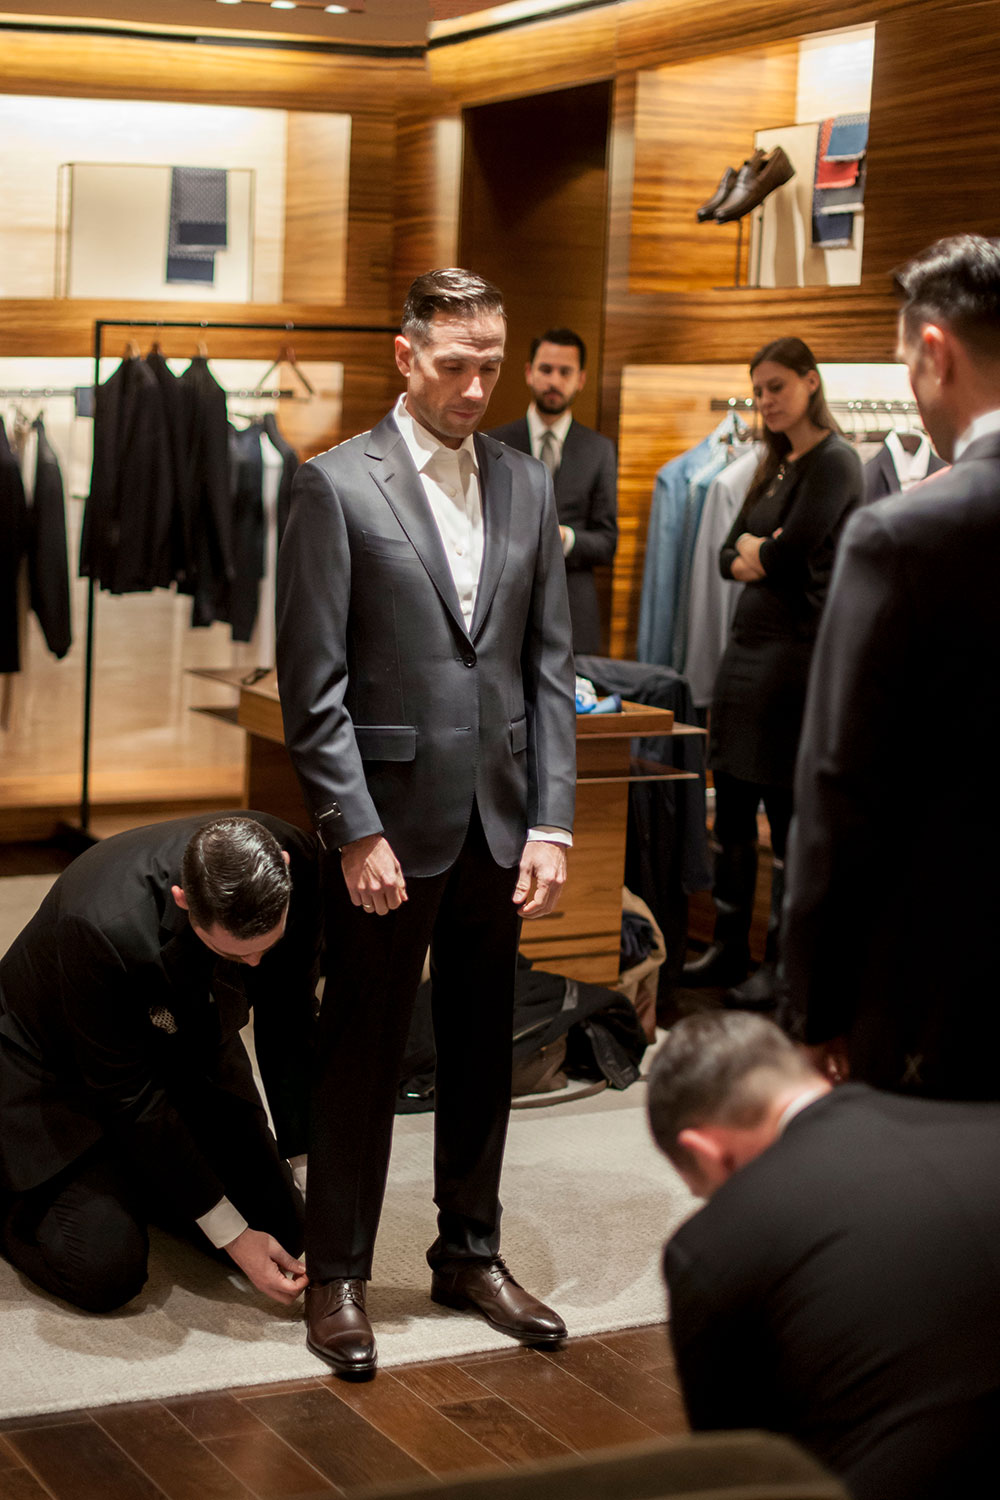 Treat yourself to a custom suit for a truly personal touch to your wedding attire.